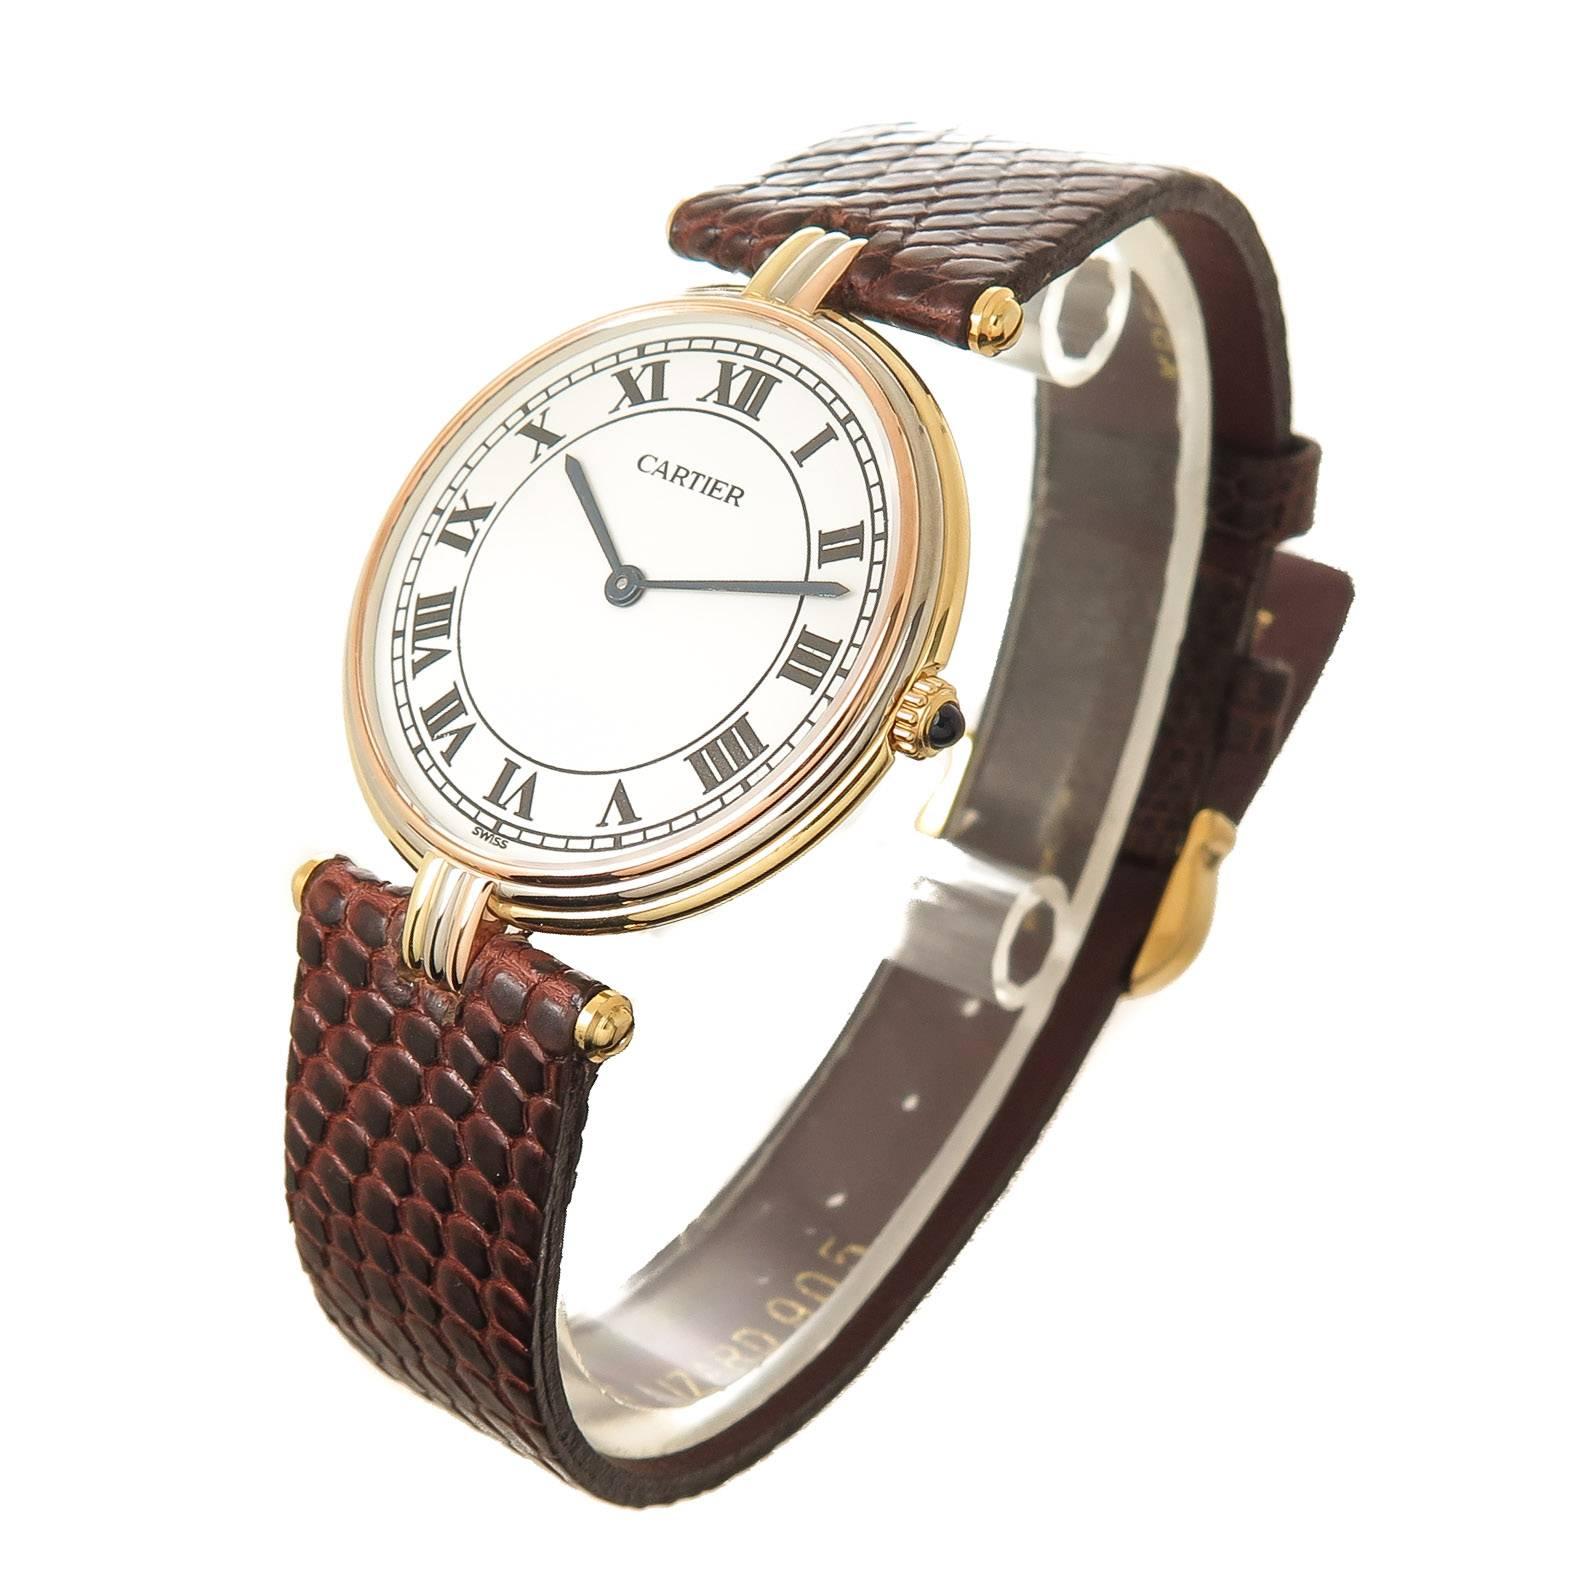 Circa 1990s Cartier 18K Yellow, White and Rose Gold Trinity Watch. 2 piece 30 MM water resistant case, Quartz Movement, White Dial with Black Roman Numerals and a Sapphire set crown. New Brown Lizard strap with a Gold Plate Cartier Tang Buckle.